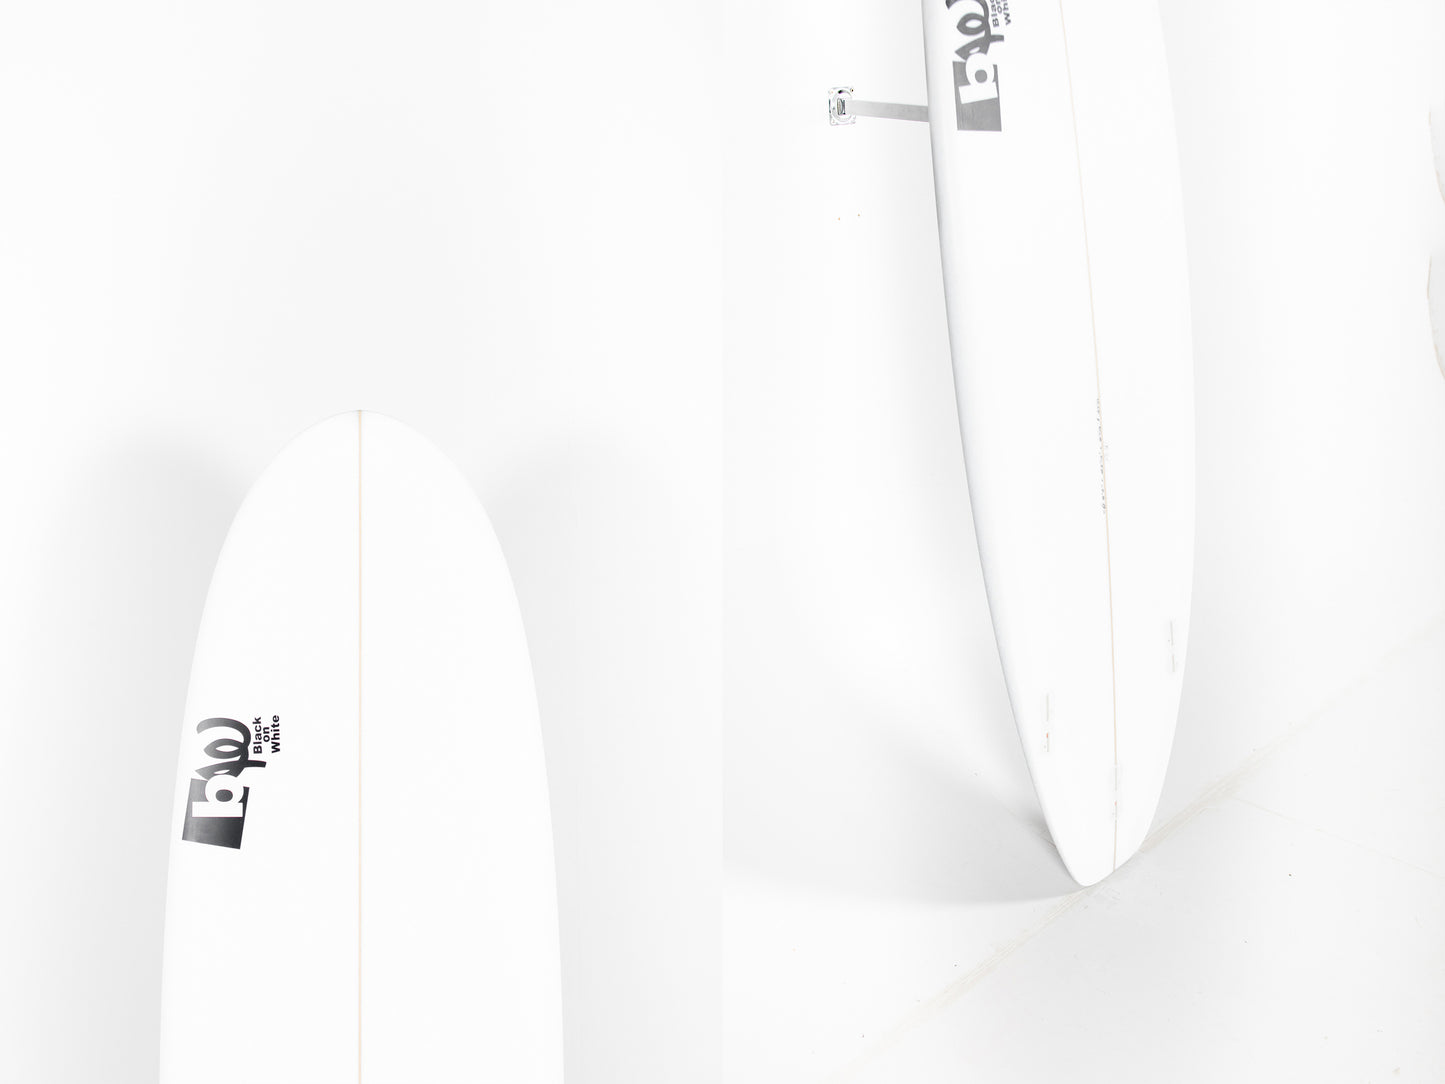 
                  
                    BW SURFBOARDS - BW SURFBOARDS Potato 6'2" x 22 1/2 x 2 5/8 x 44.7L. at PUKAS SURF SHOP
                  
                